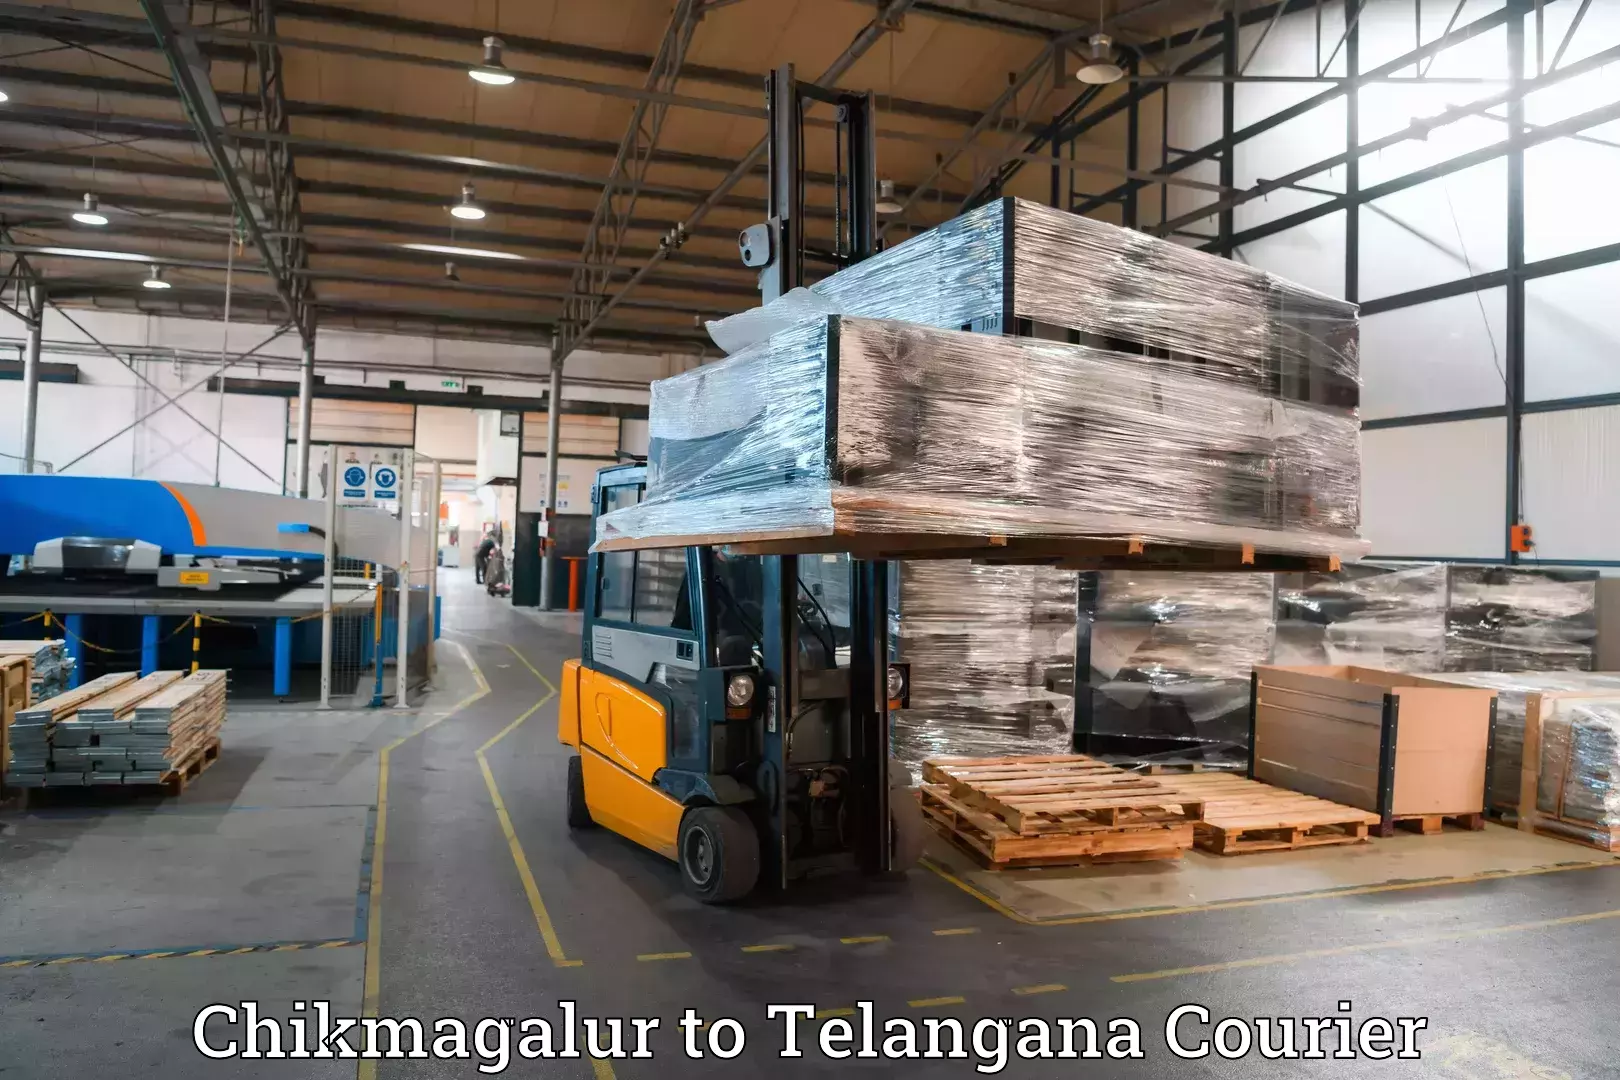 Baggage relocation service Chikmagalur to Raikal